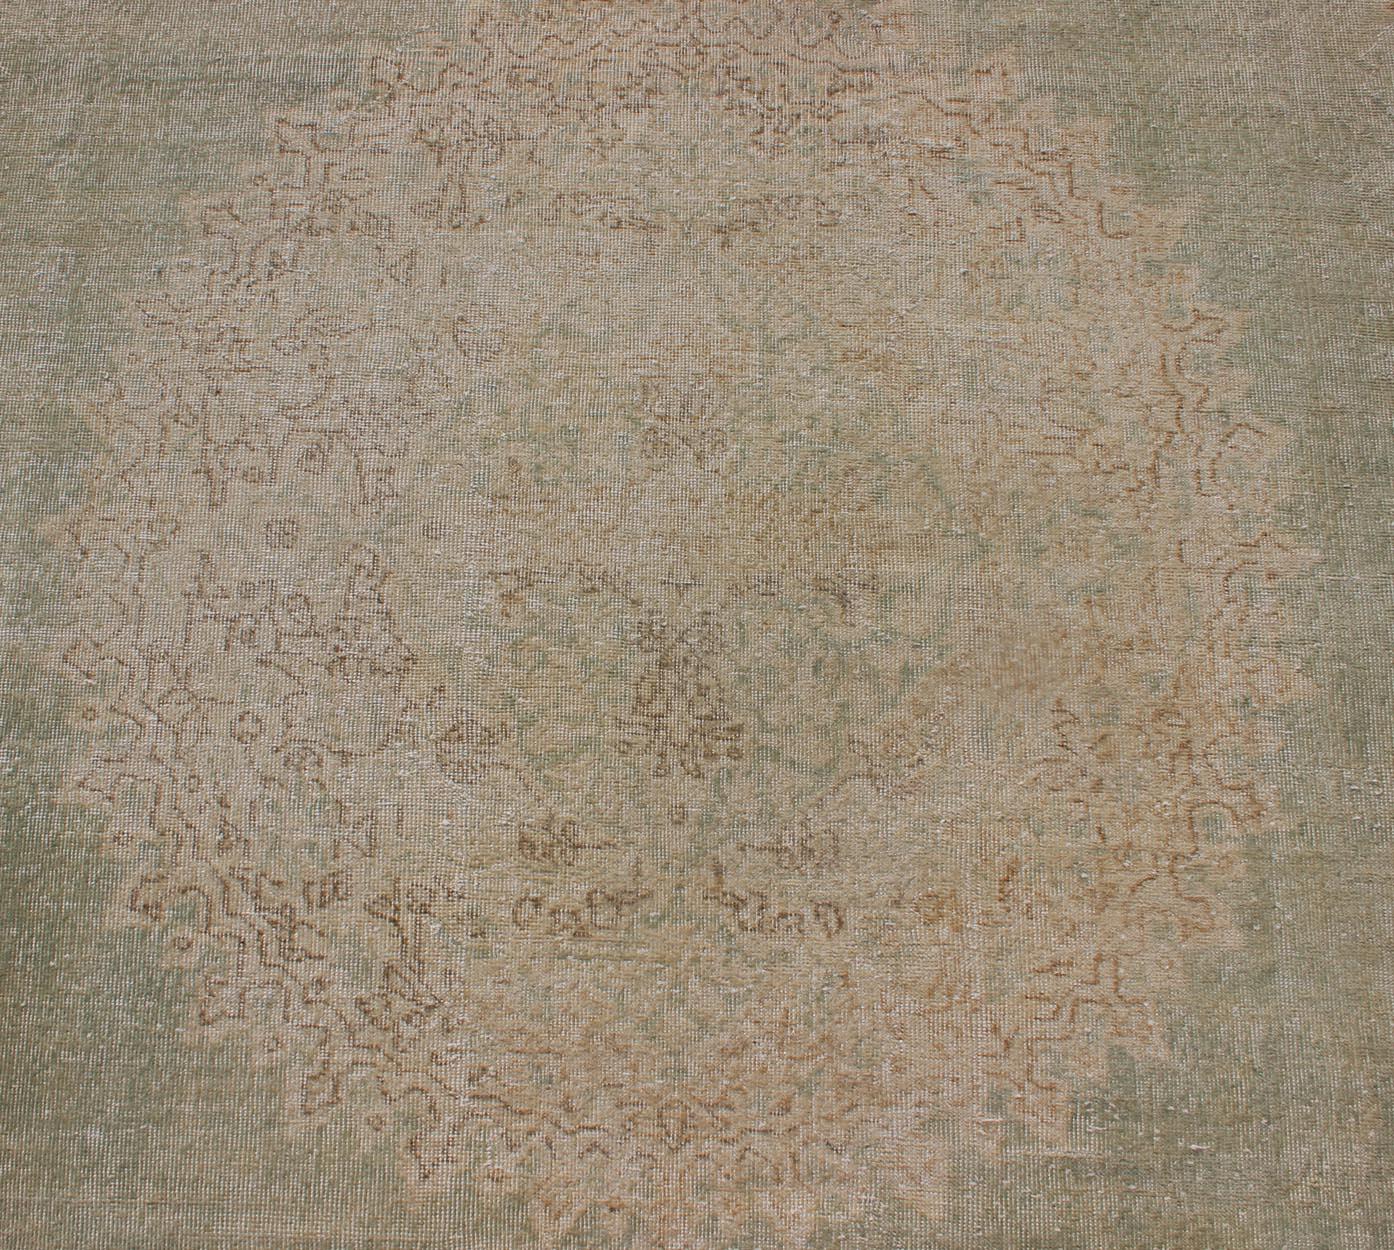 Distressed Turkish Carpet with Floral Medallion in Light Green, Tan and Taupe For Sale 5